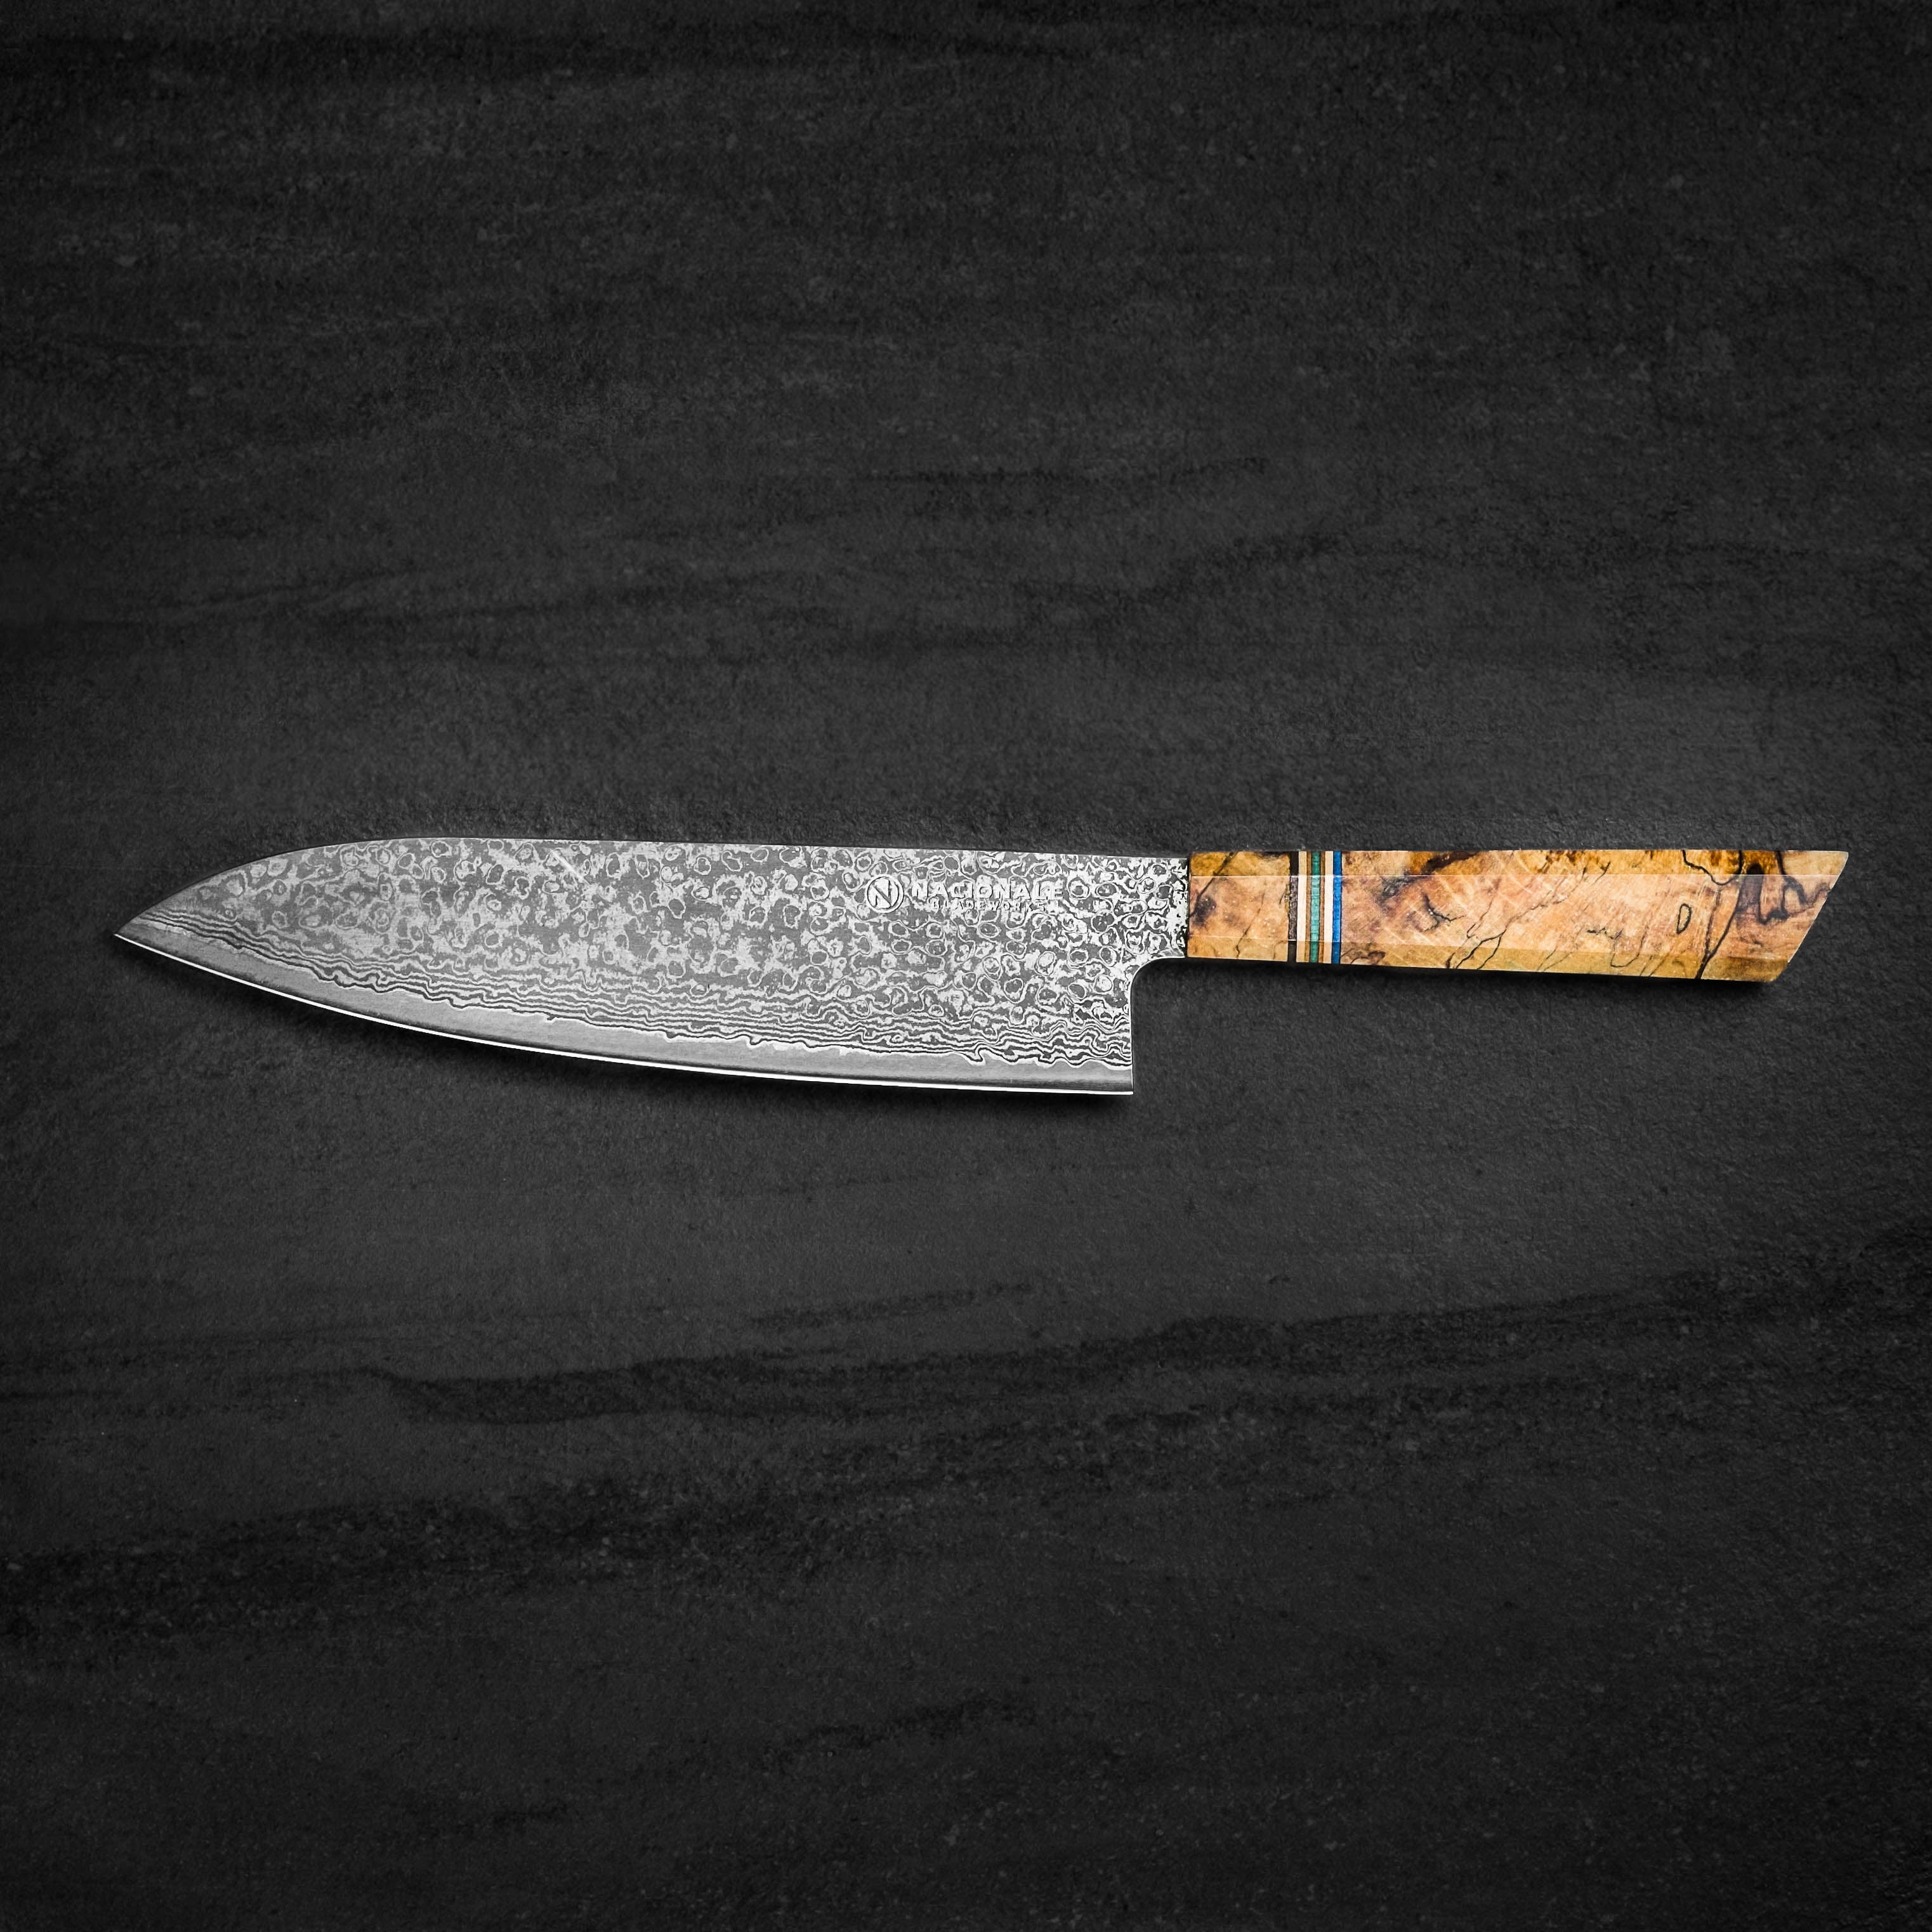 215mm Damascus Tall Gyuto. Stabilized Spalted Maple Handle. Skateboard Spacer - Nacionale Bladeworks